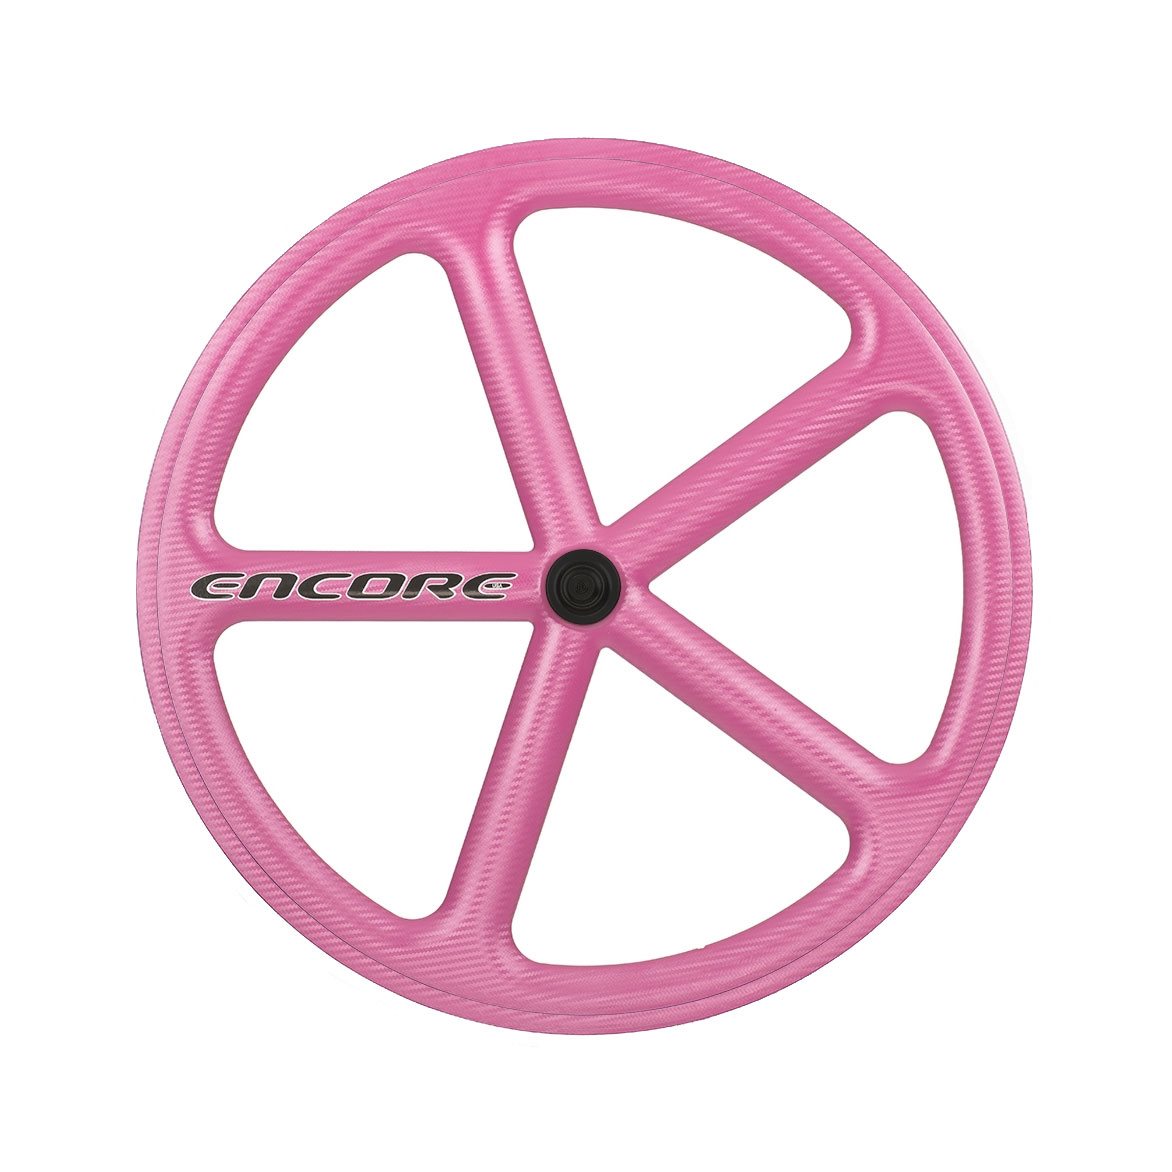 rear wheel 700c track 5 spokes carbon weave pink nmsw